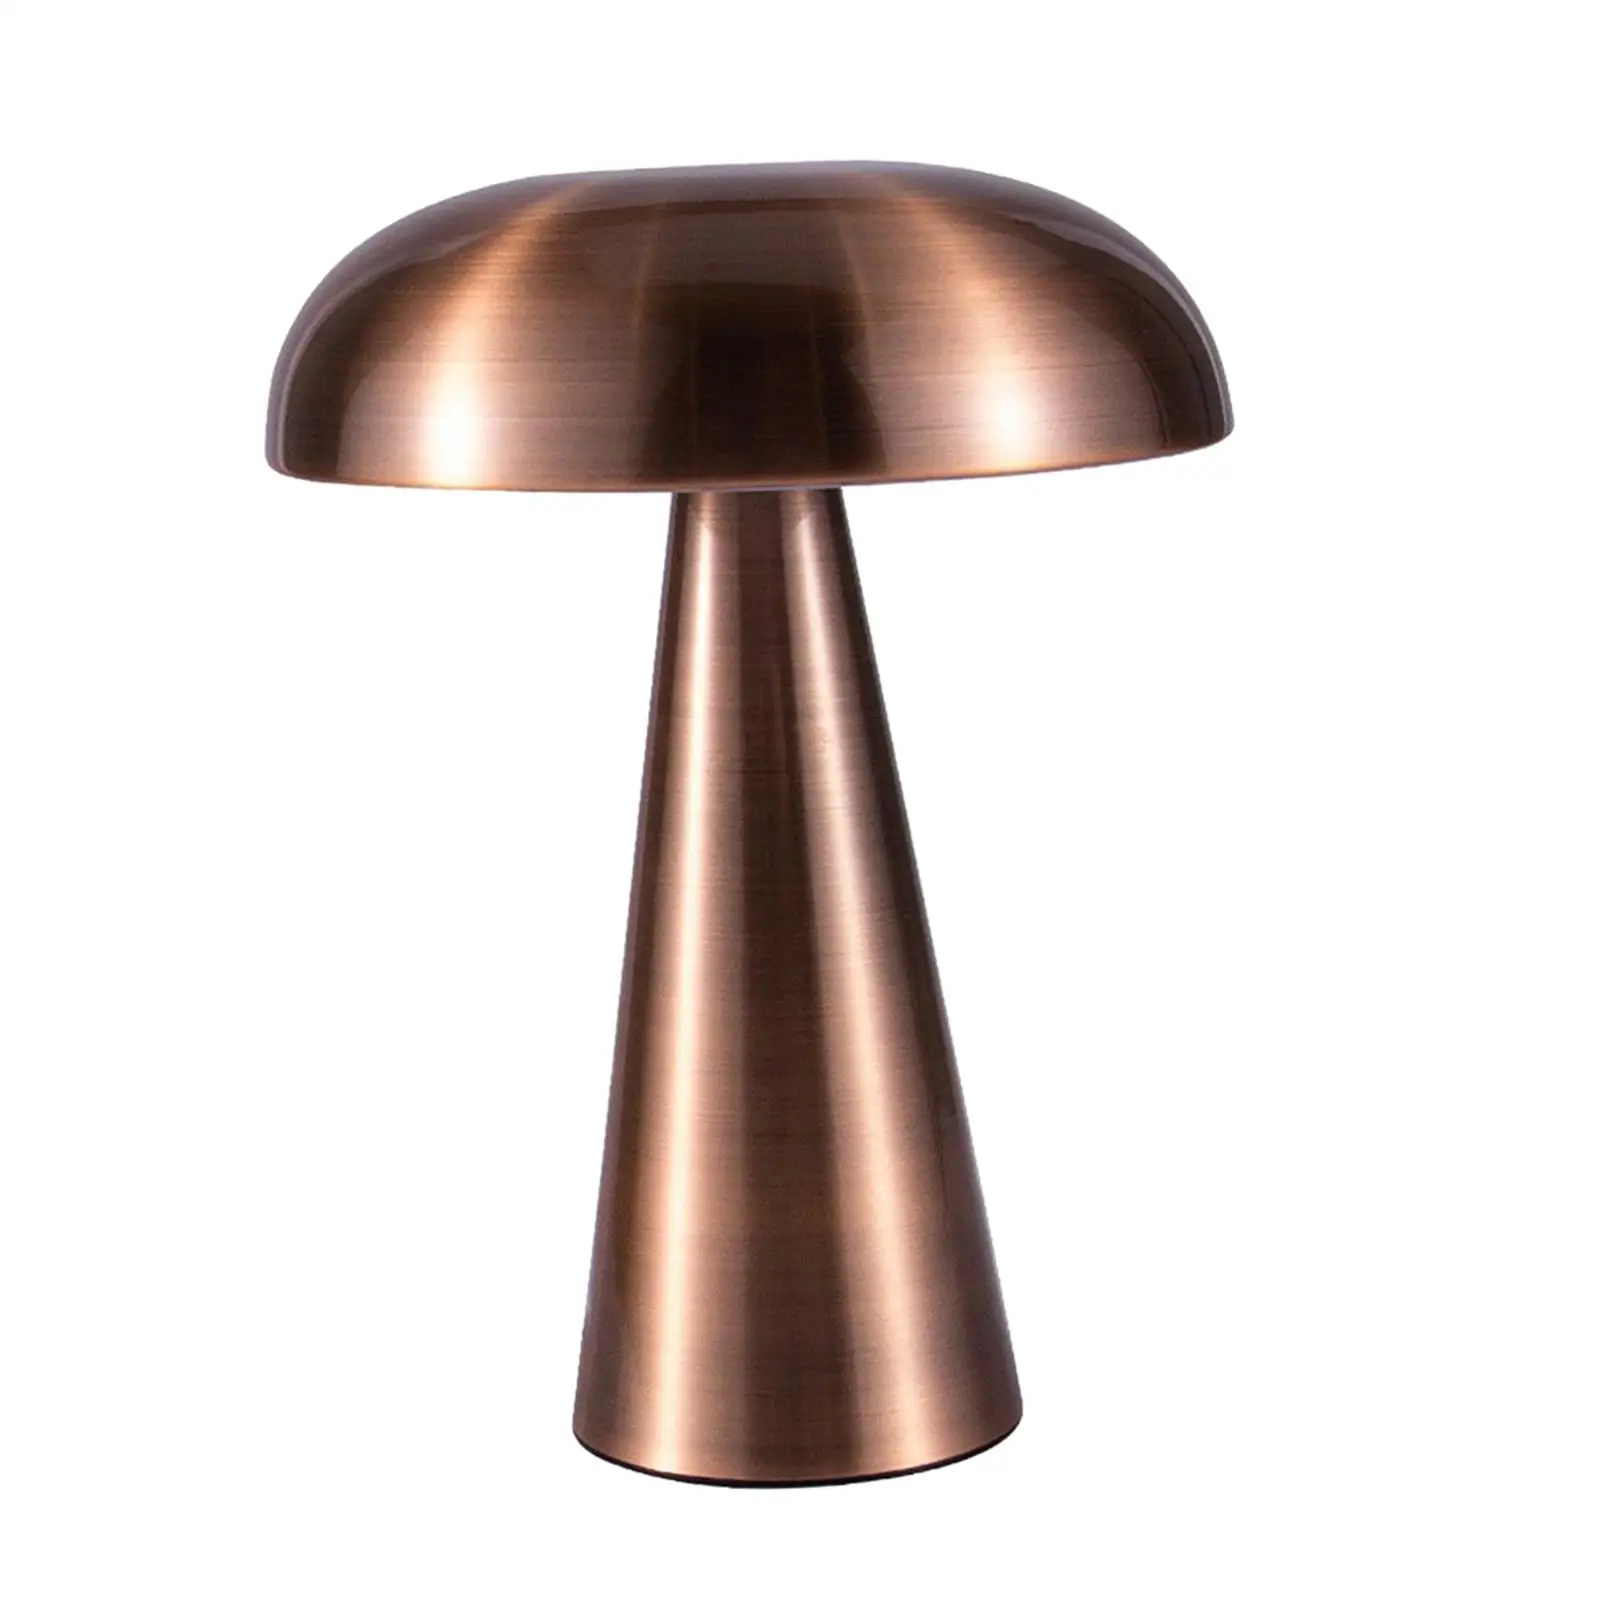 Portable Mushroom Table Lamp 3 Levels Brightness USB Rechargeable Touch LED